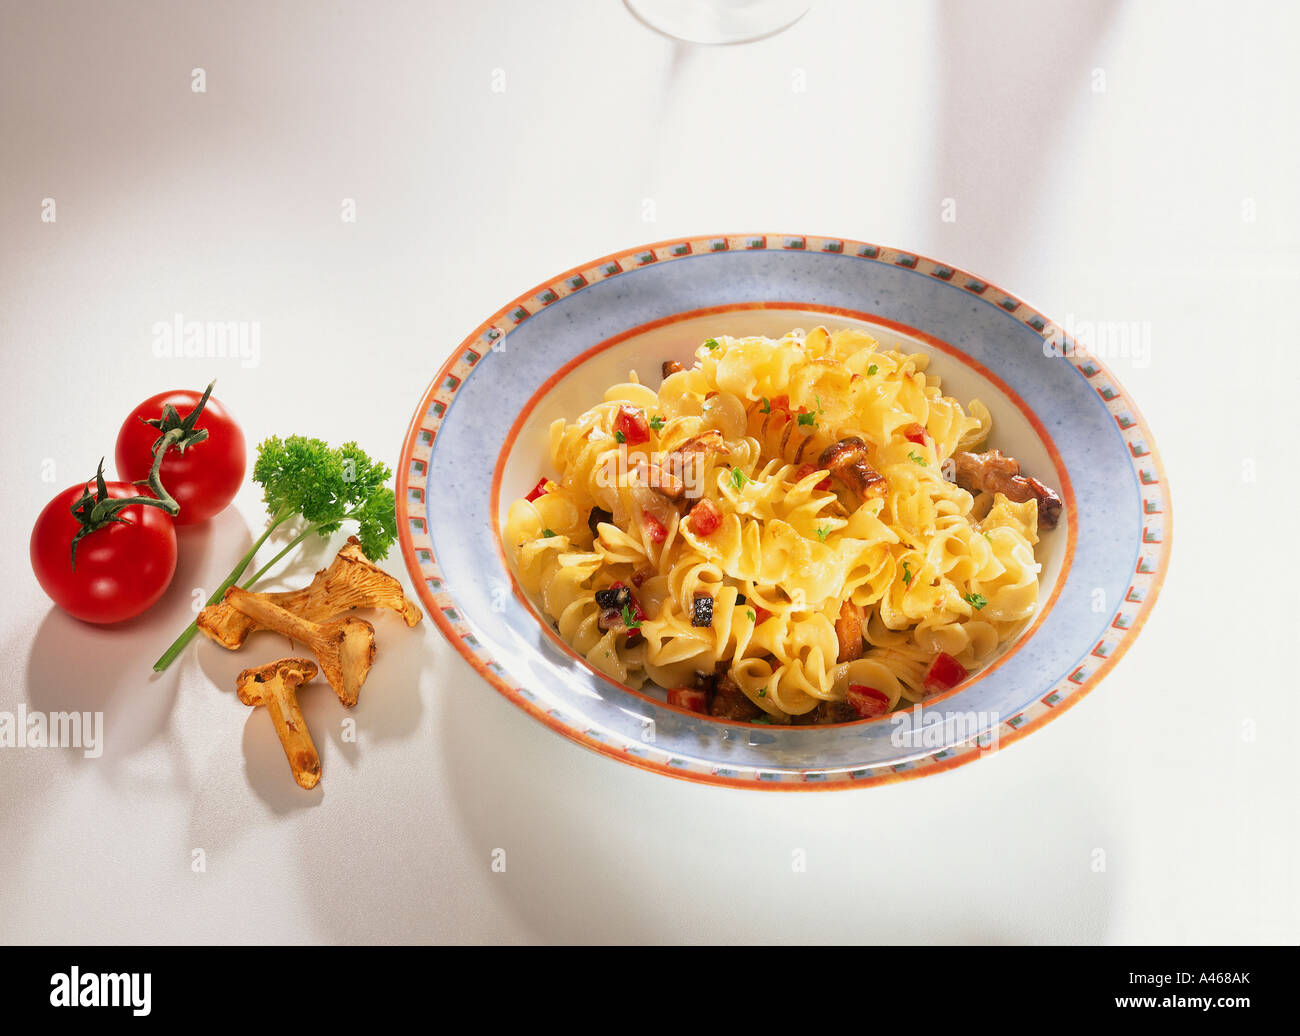 Noodles on a plate Stock Photo